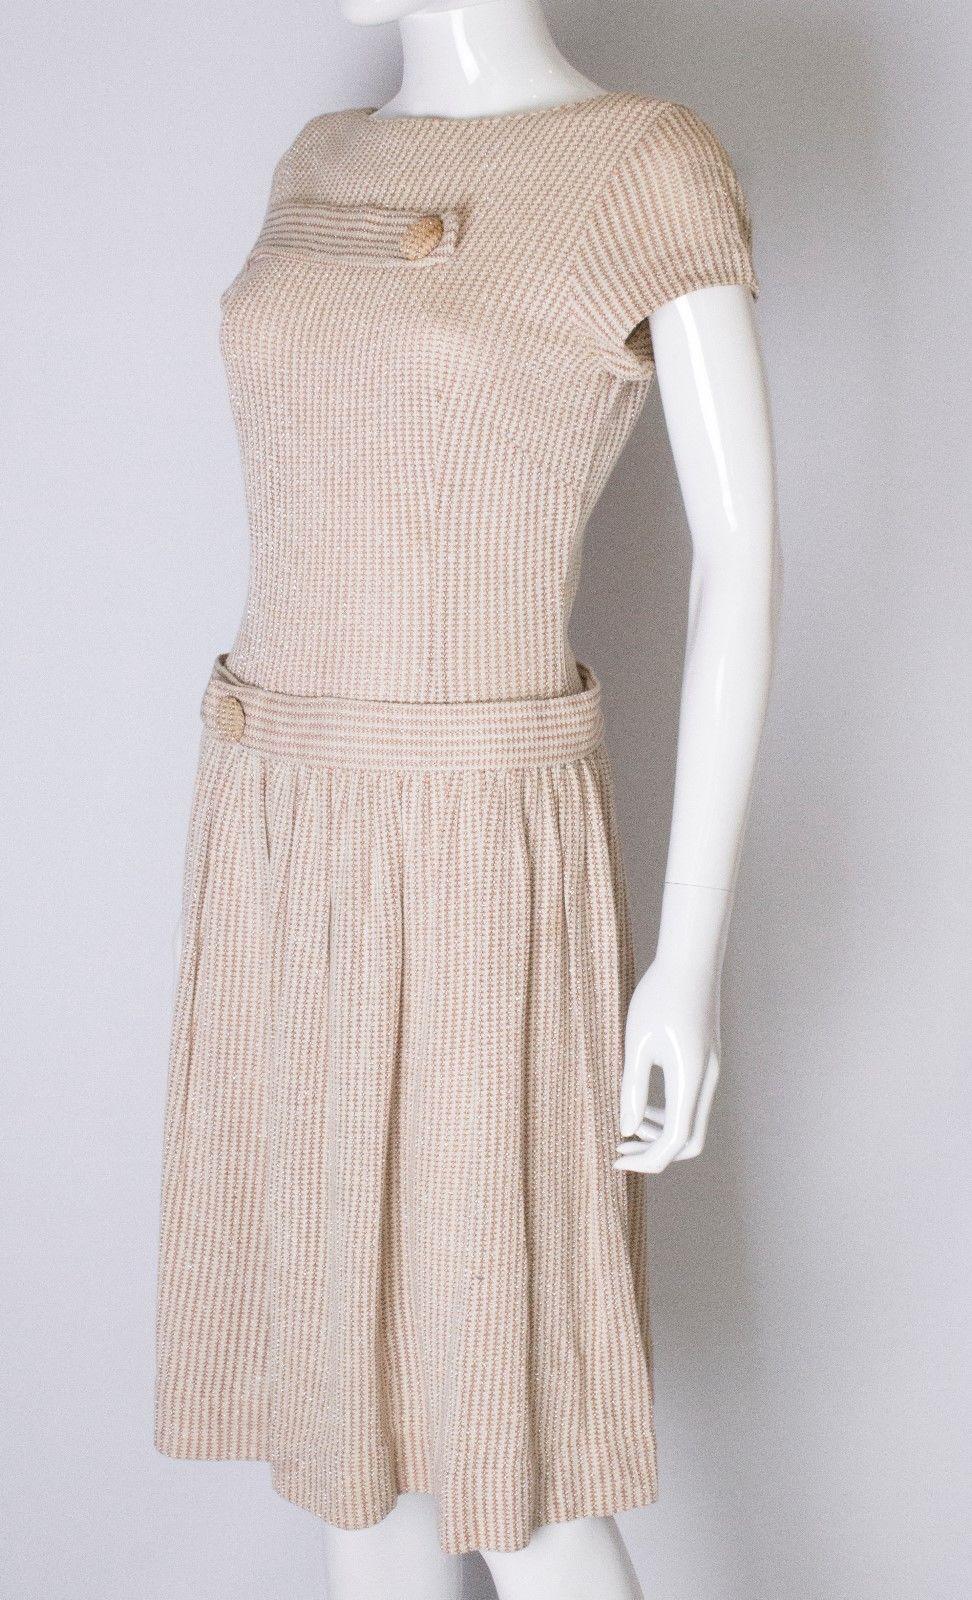 A vintage 1950s cream woven dress with red and silver thread throughout 

drop waist with two large button detail zips at the back

measurements taken flat in inches 

bust -17
waist -15
length - 42
 
uk 8 - 10